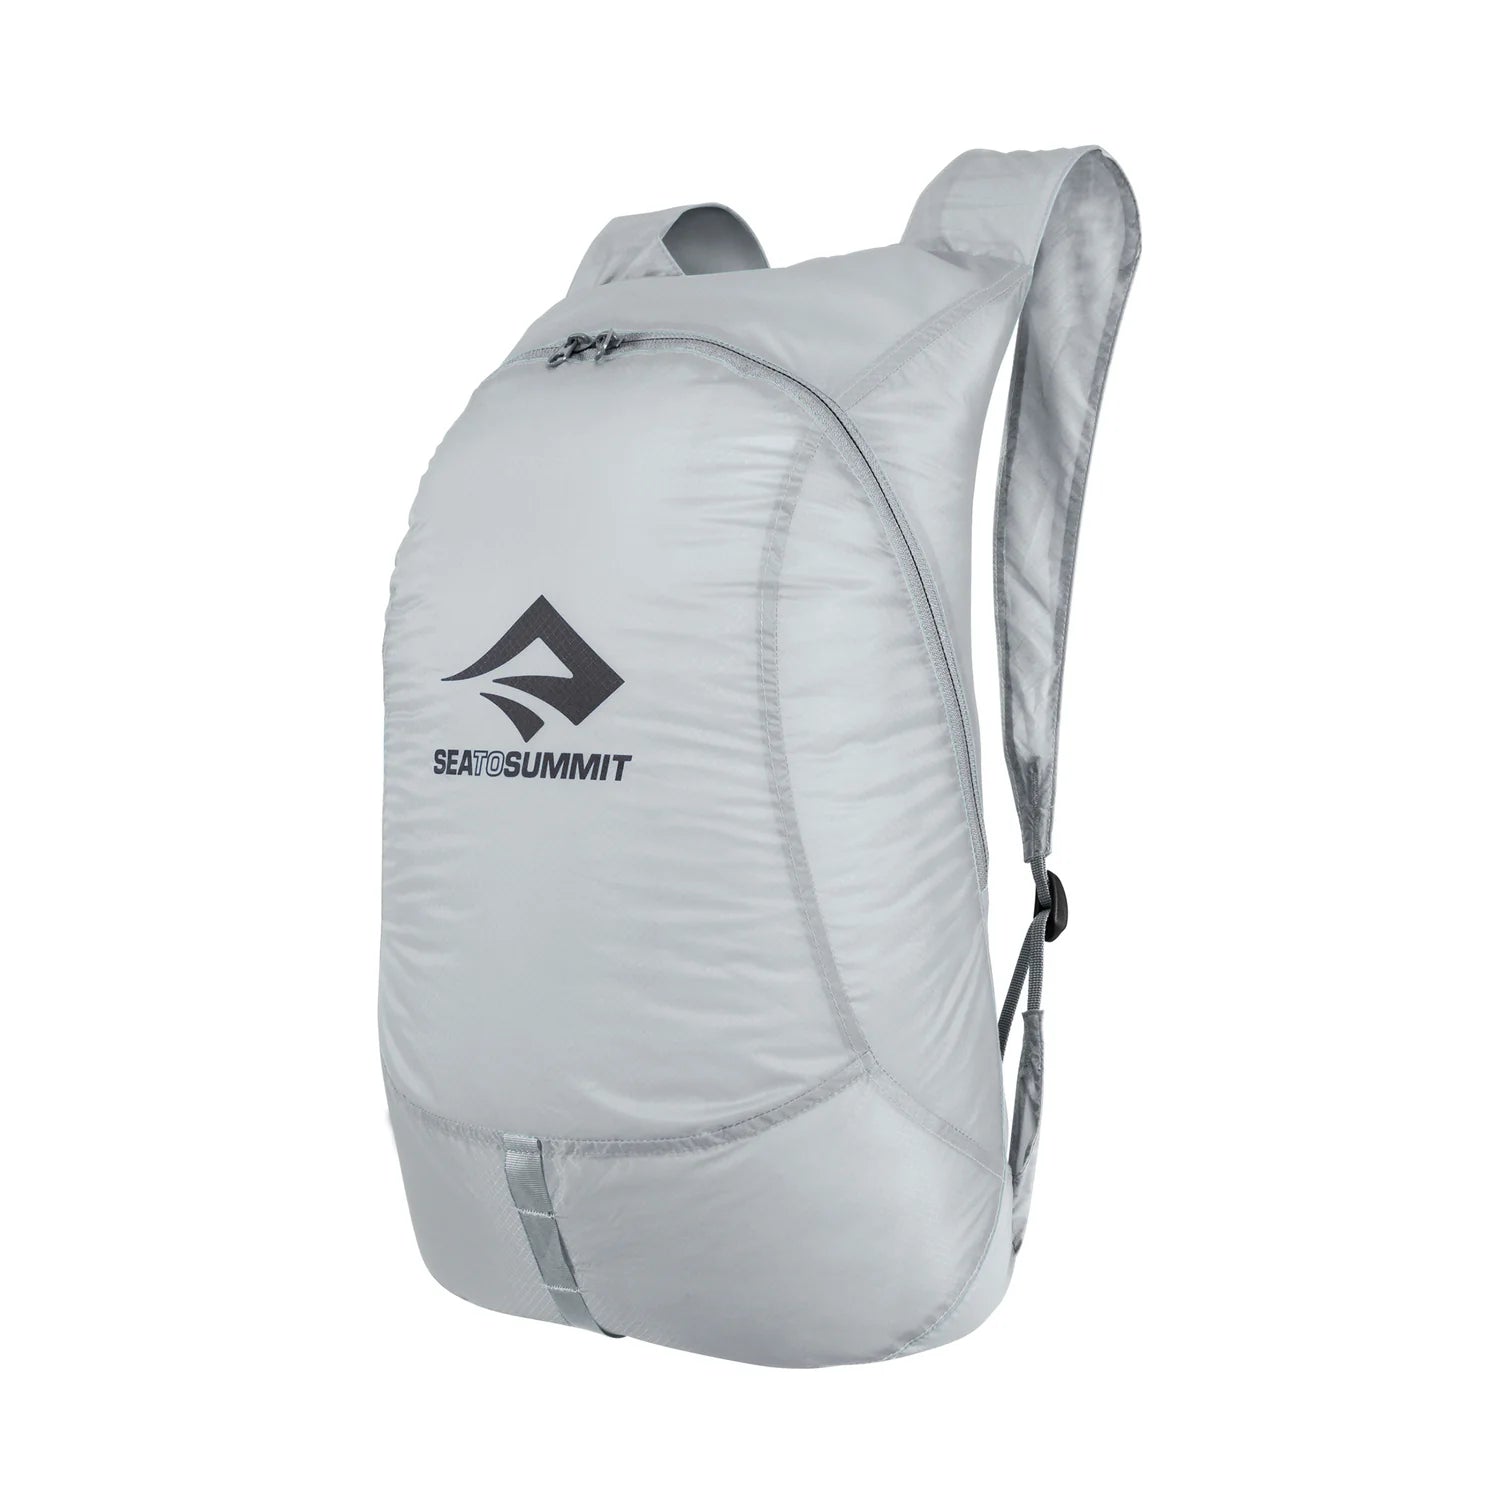 Sea to Summit Ultra-Sil Day Pack - 20 Litres